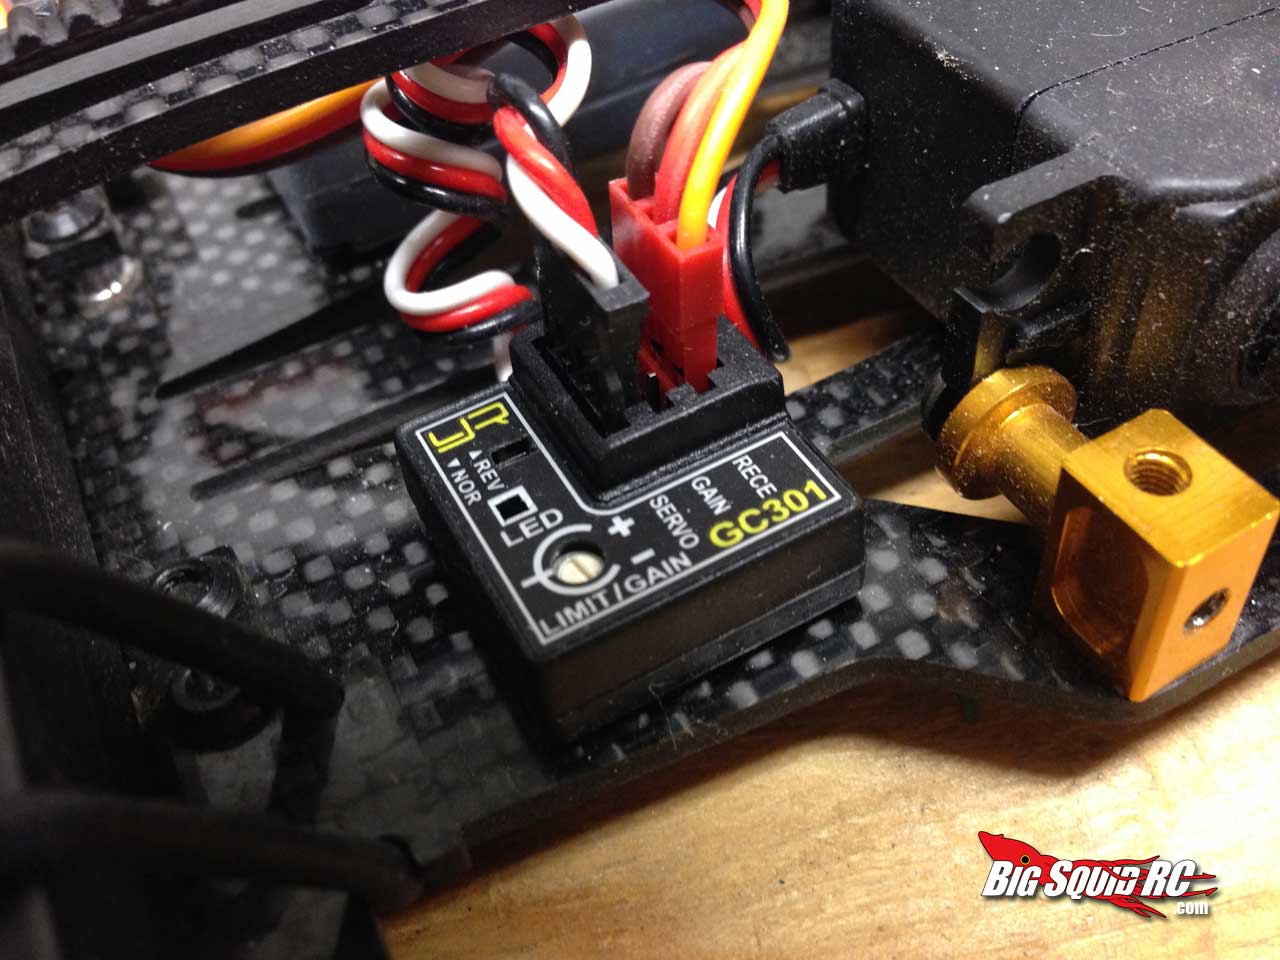 best gyro for rc car